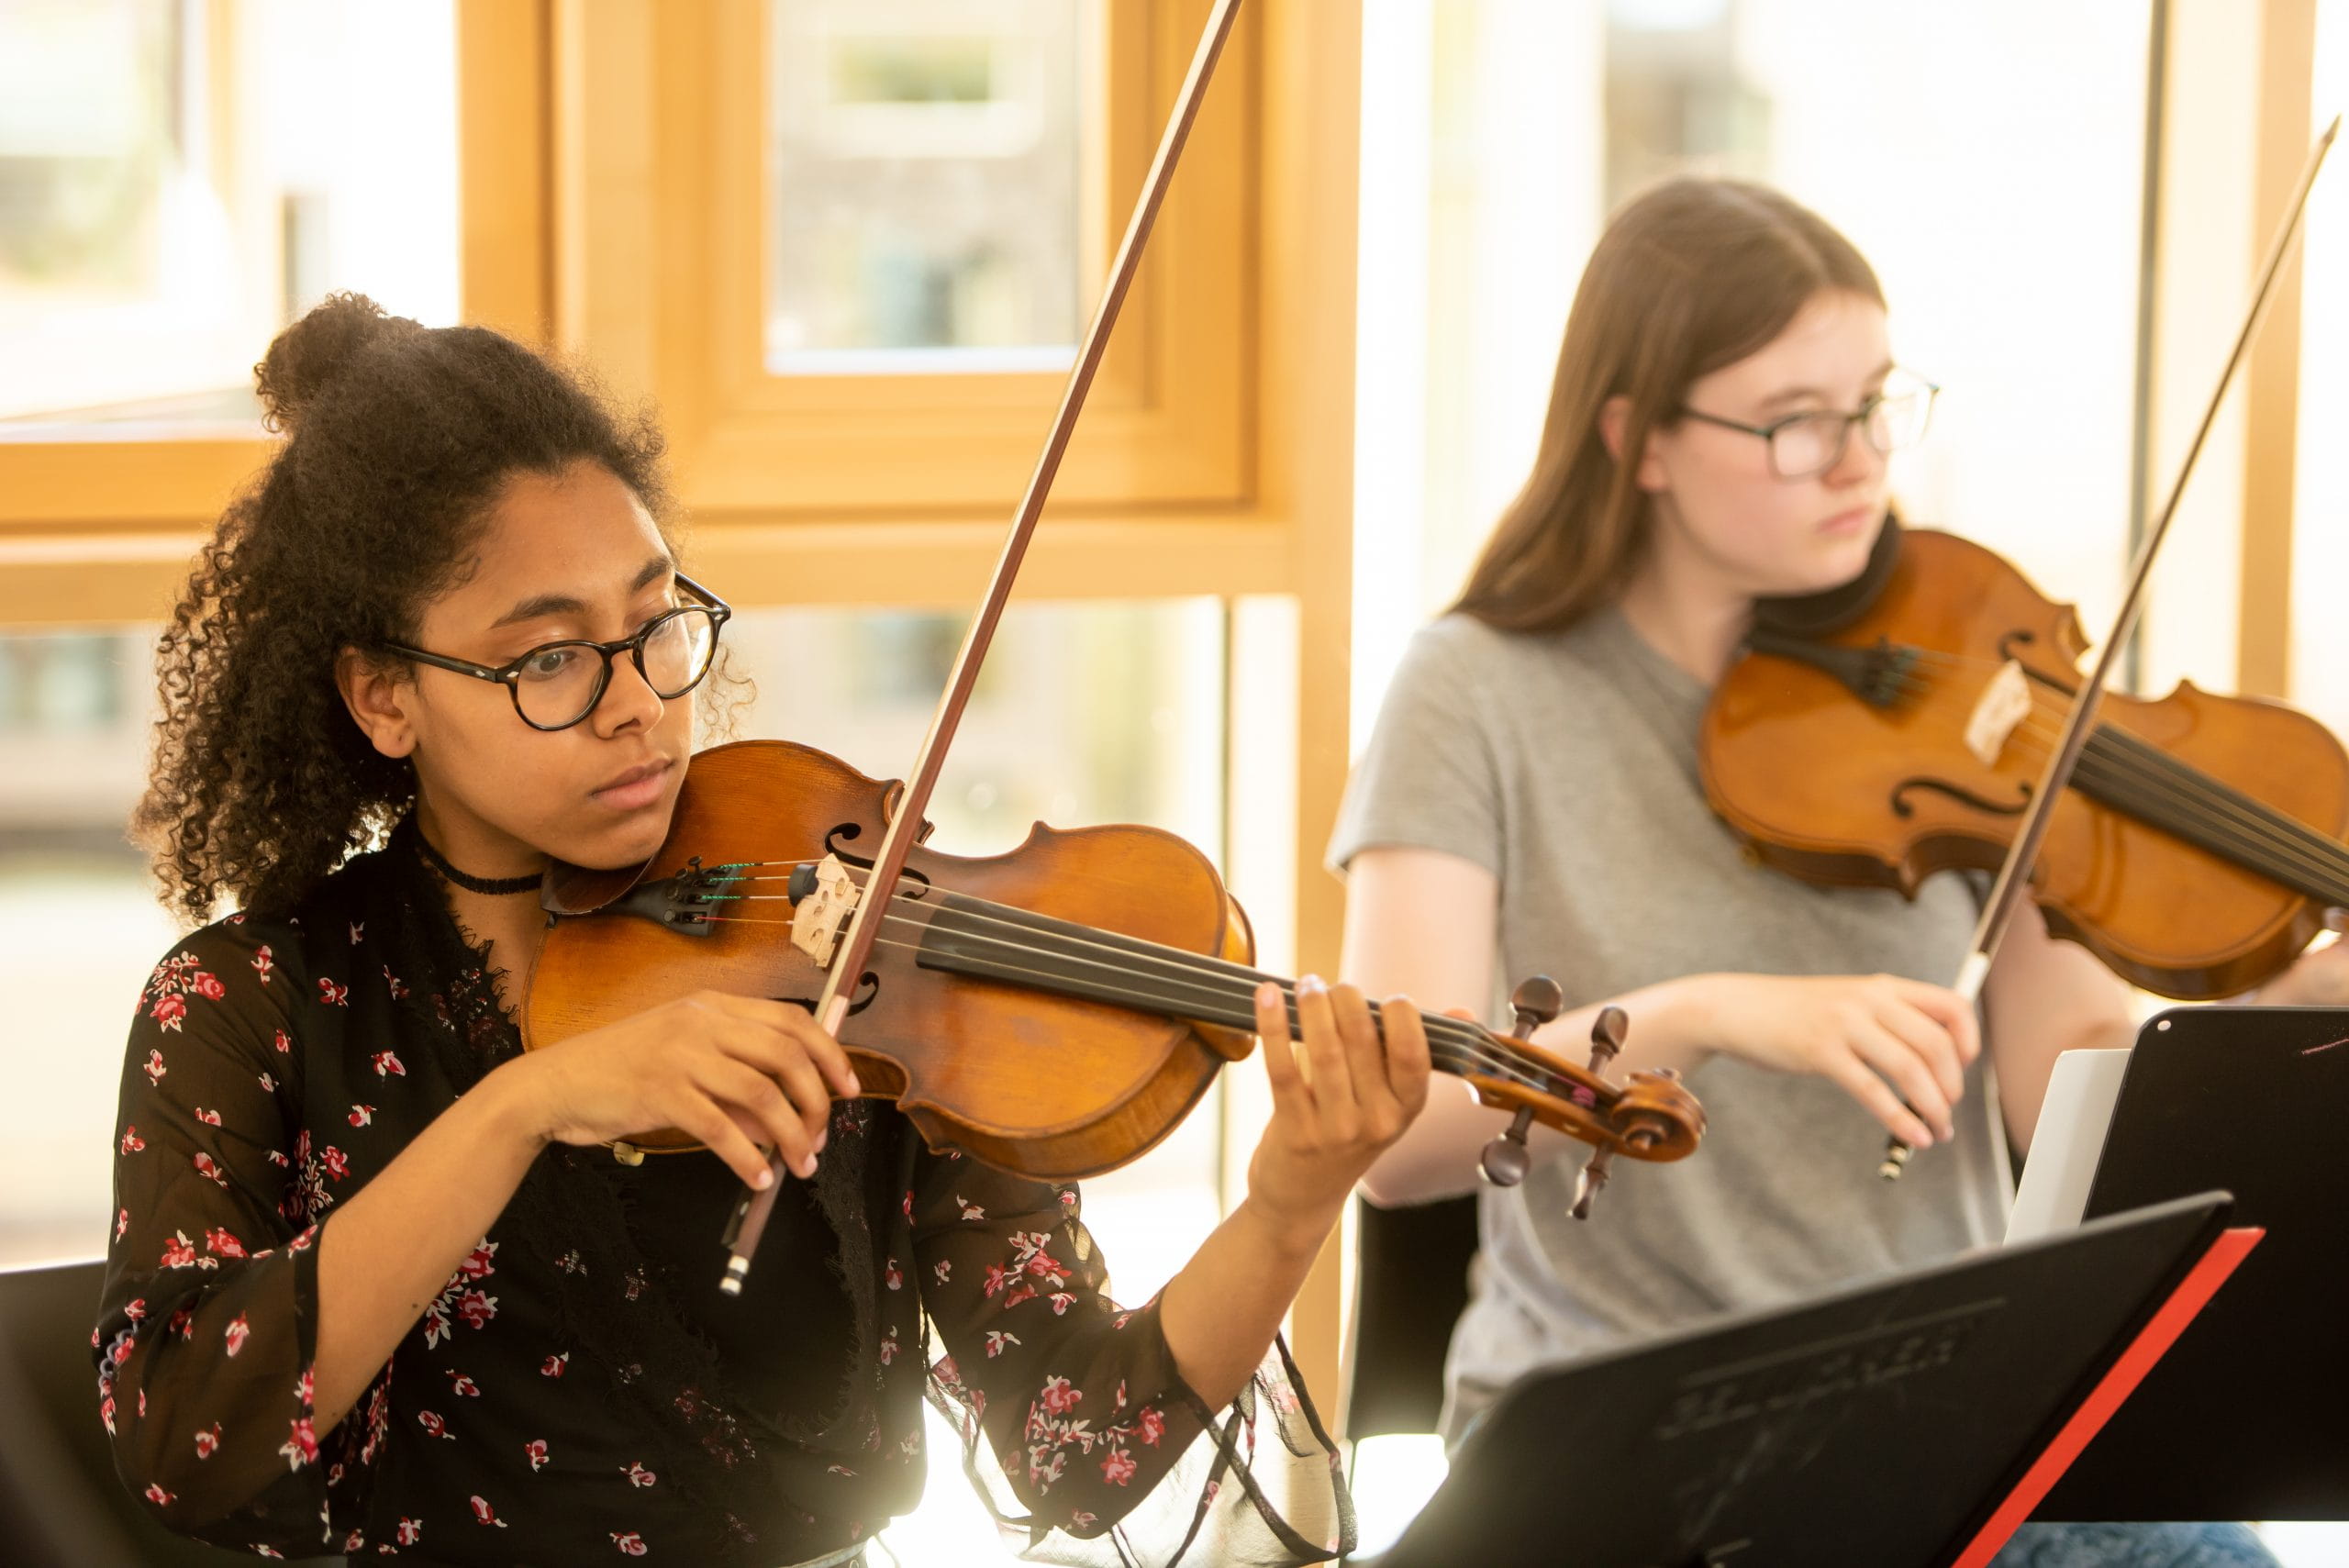 Oxford Chamber Music Composition Competition 2021-oxford-chamber-music-composition-competition-2021-DOverbroecks-June-2018-1295-scaled